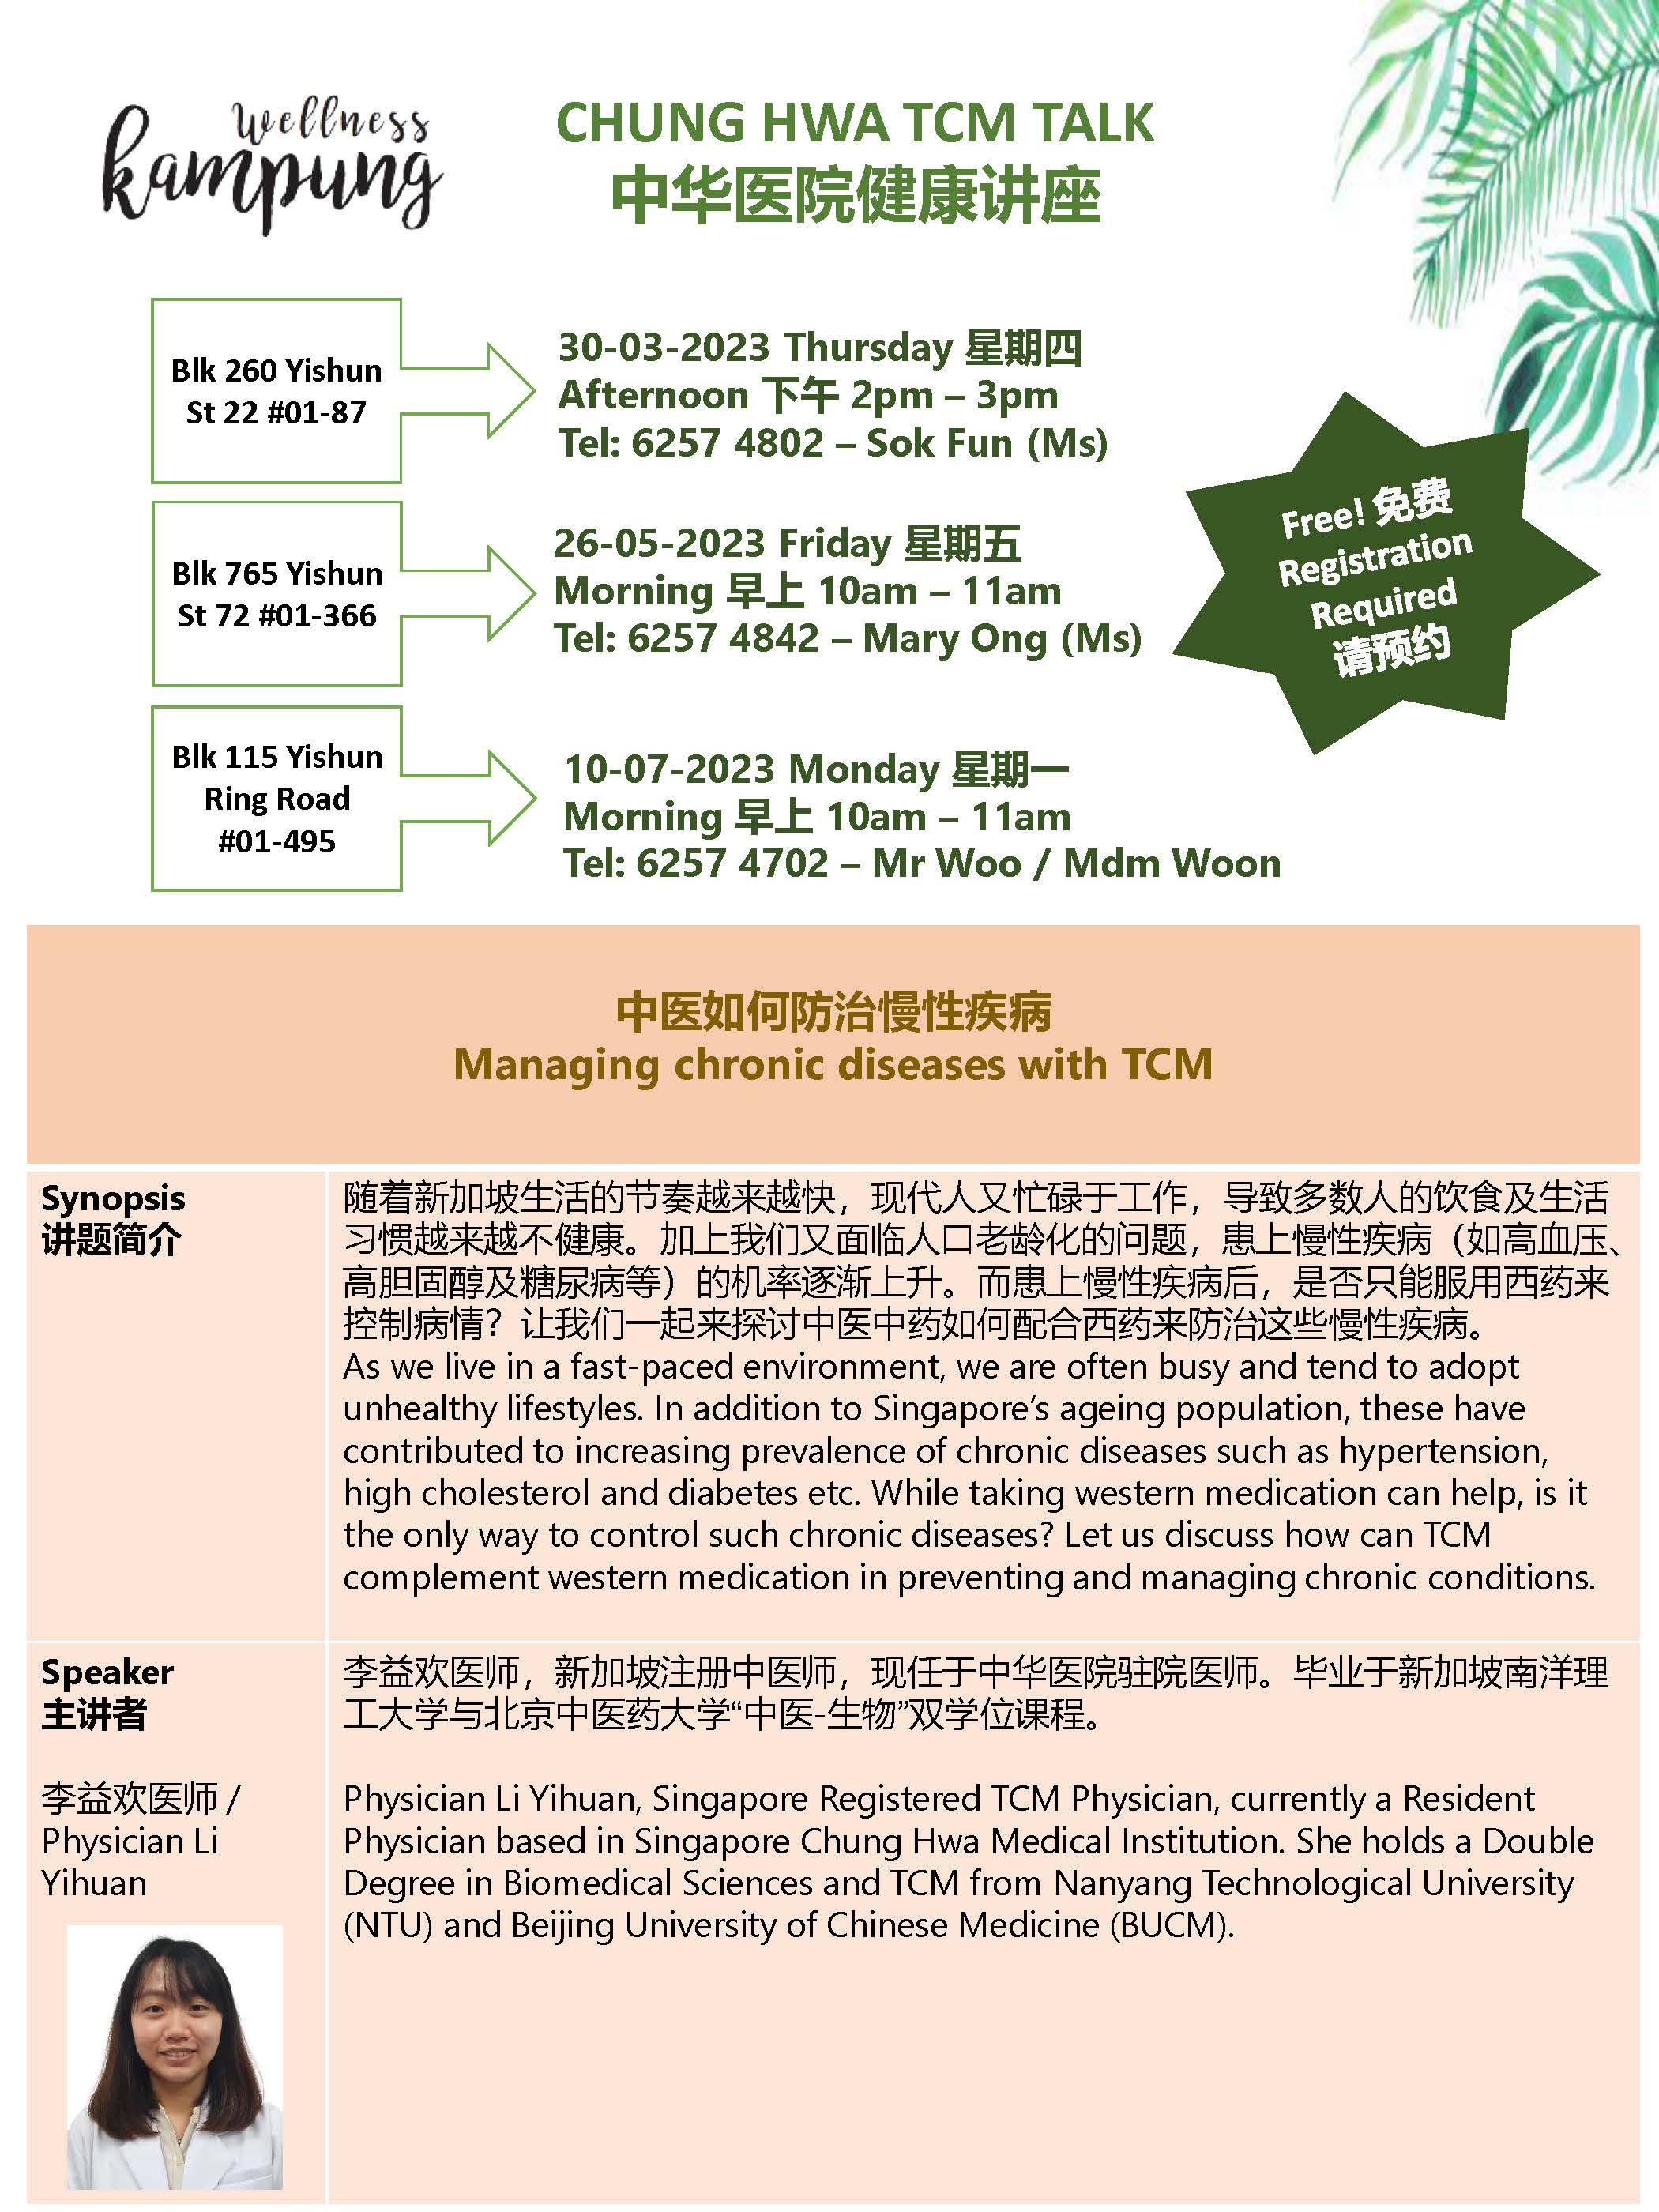 Poster on talk - Managing Chronic Diseases with TCM